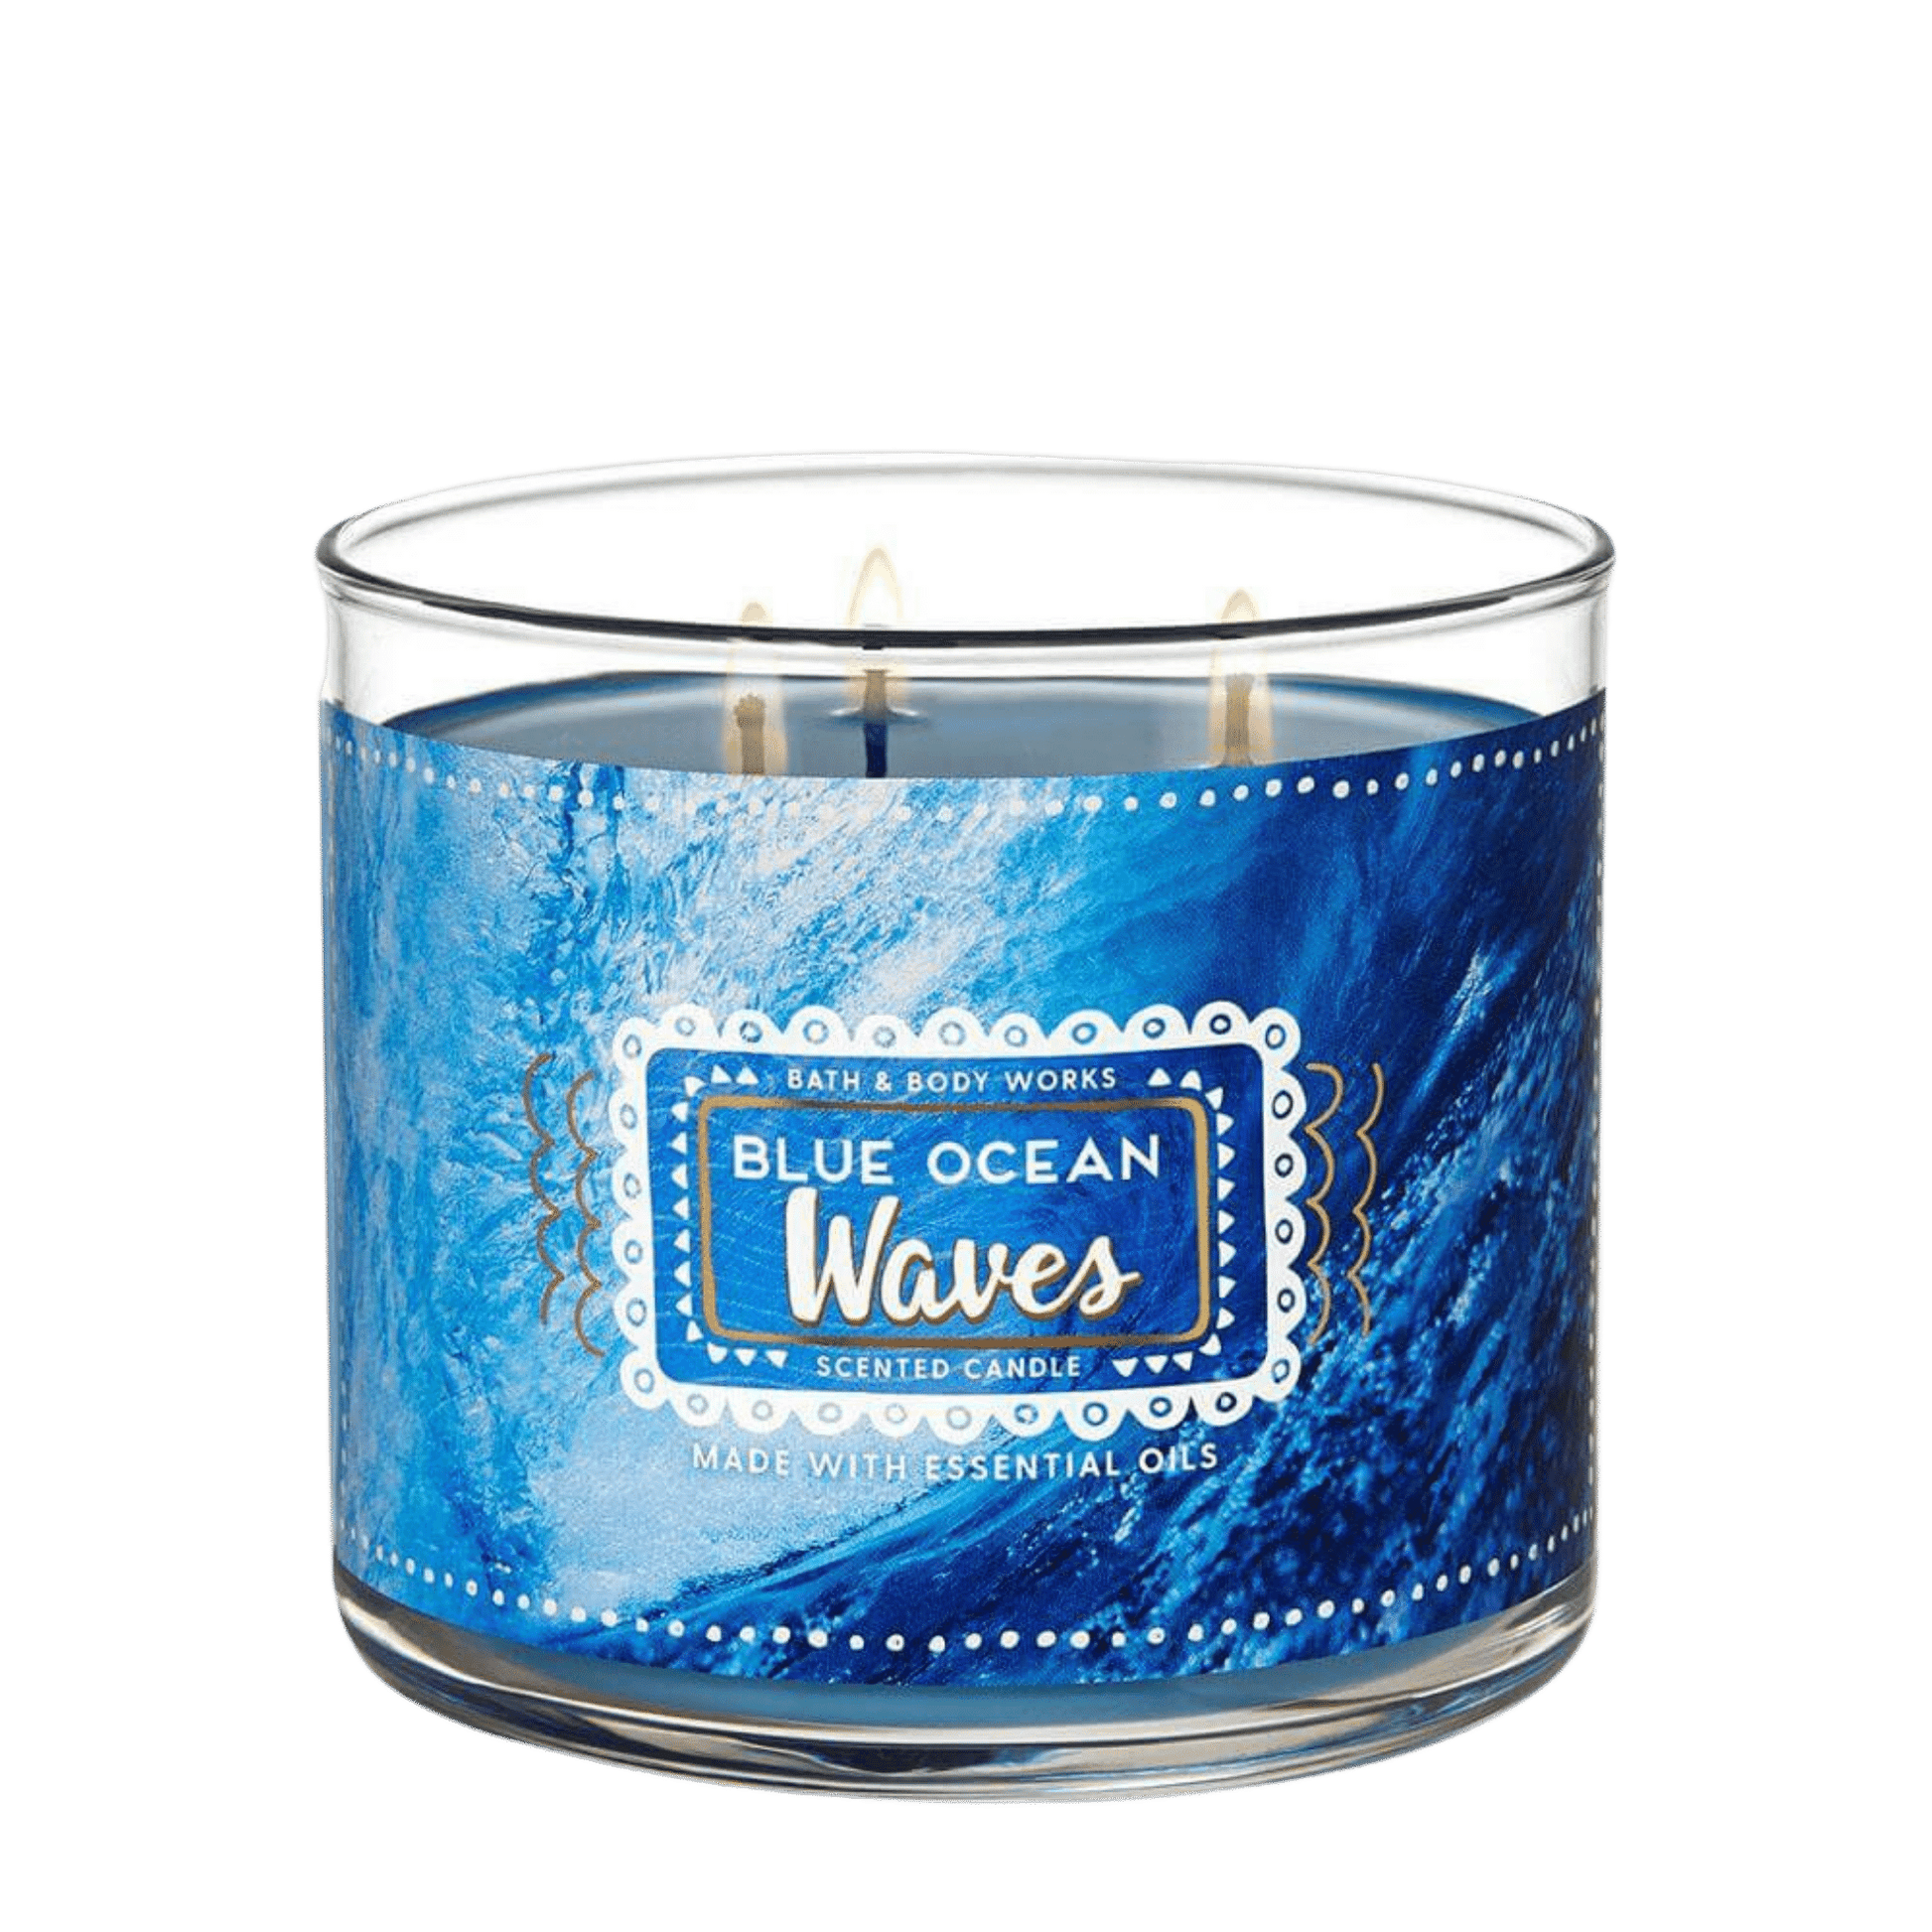 Blue Ocean Wave Candle for sale in Pakistan